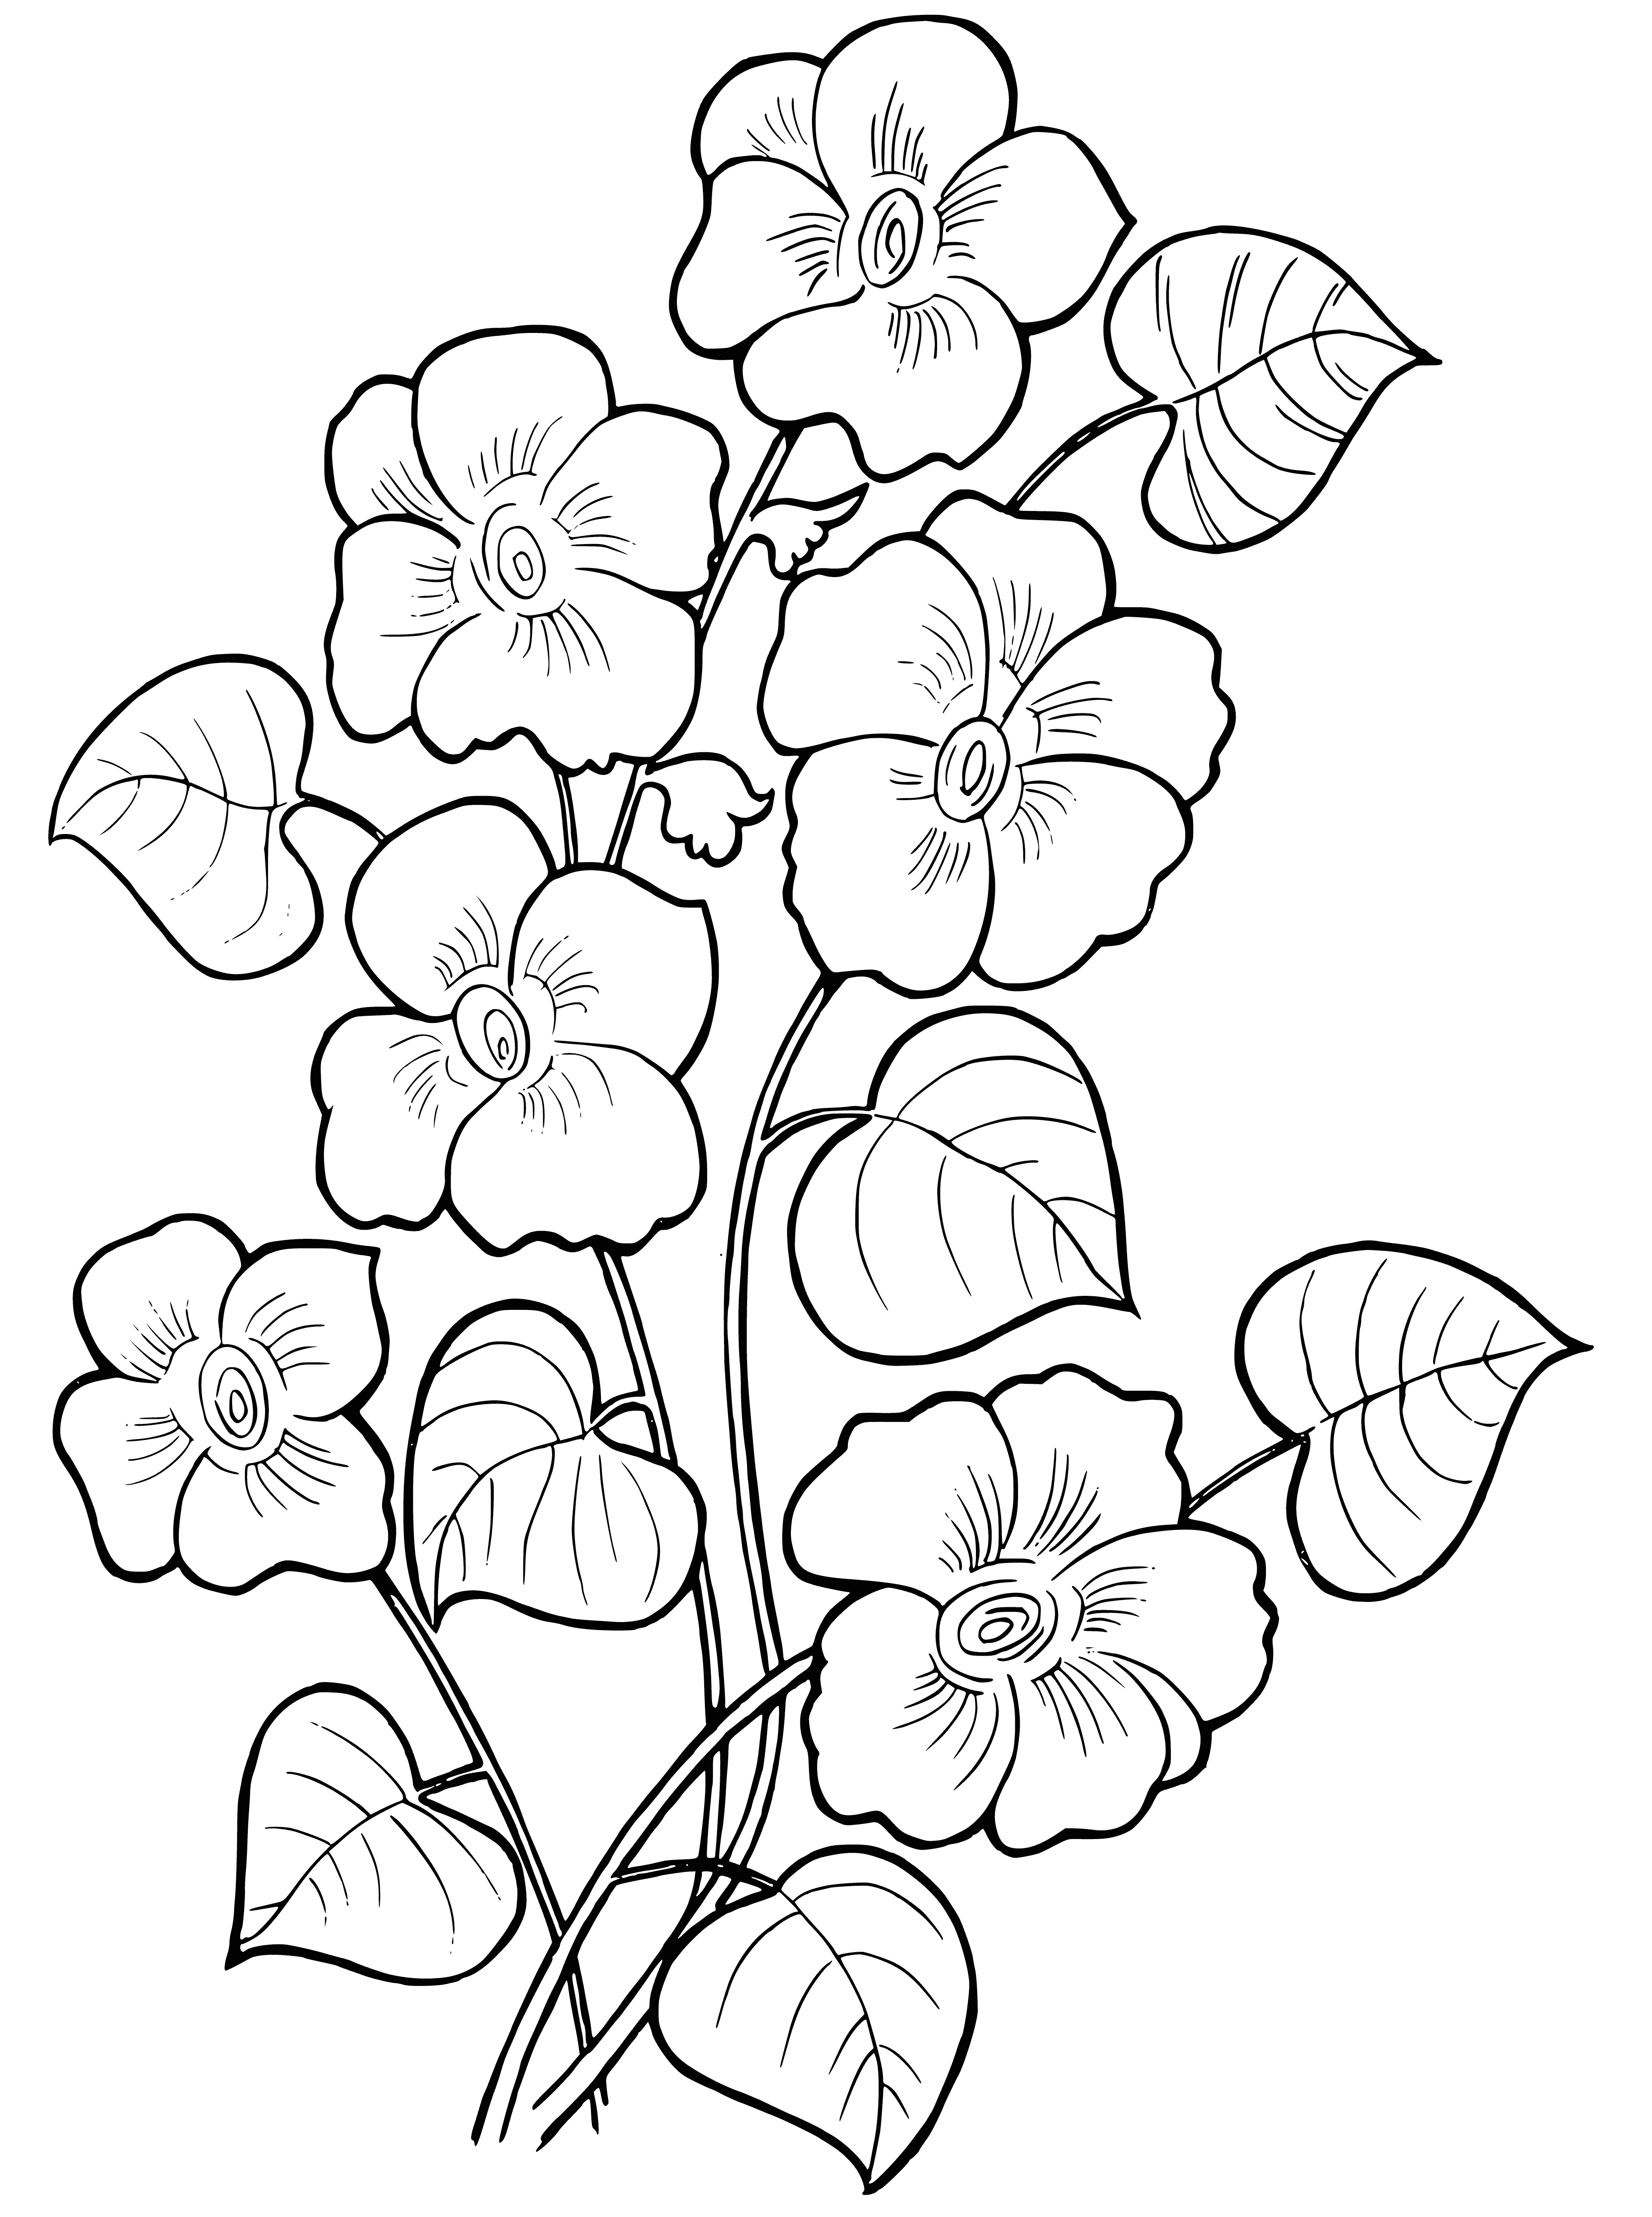 coloring page: Coloring page has flowers/leaves in various colors: white, yellow, pink, green.